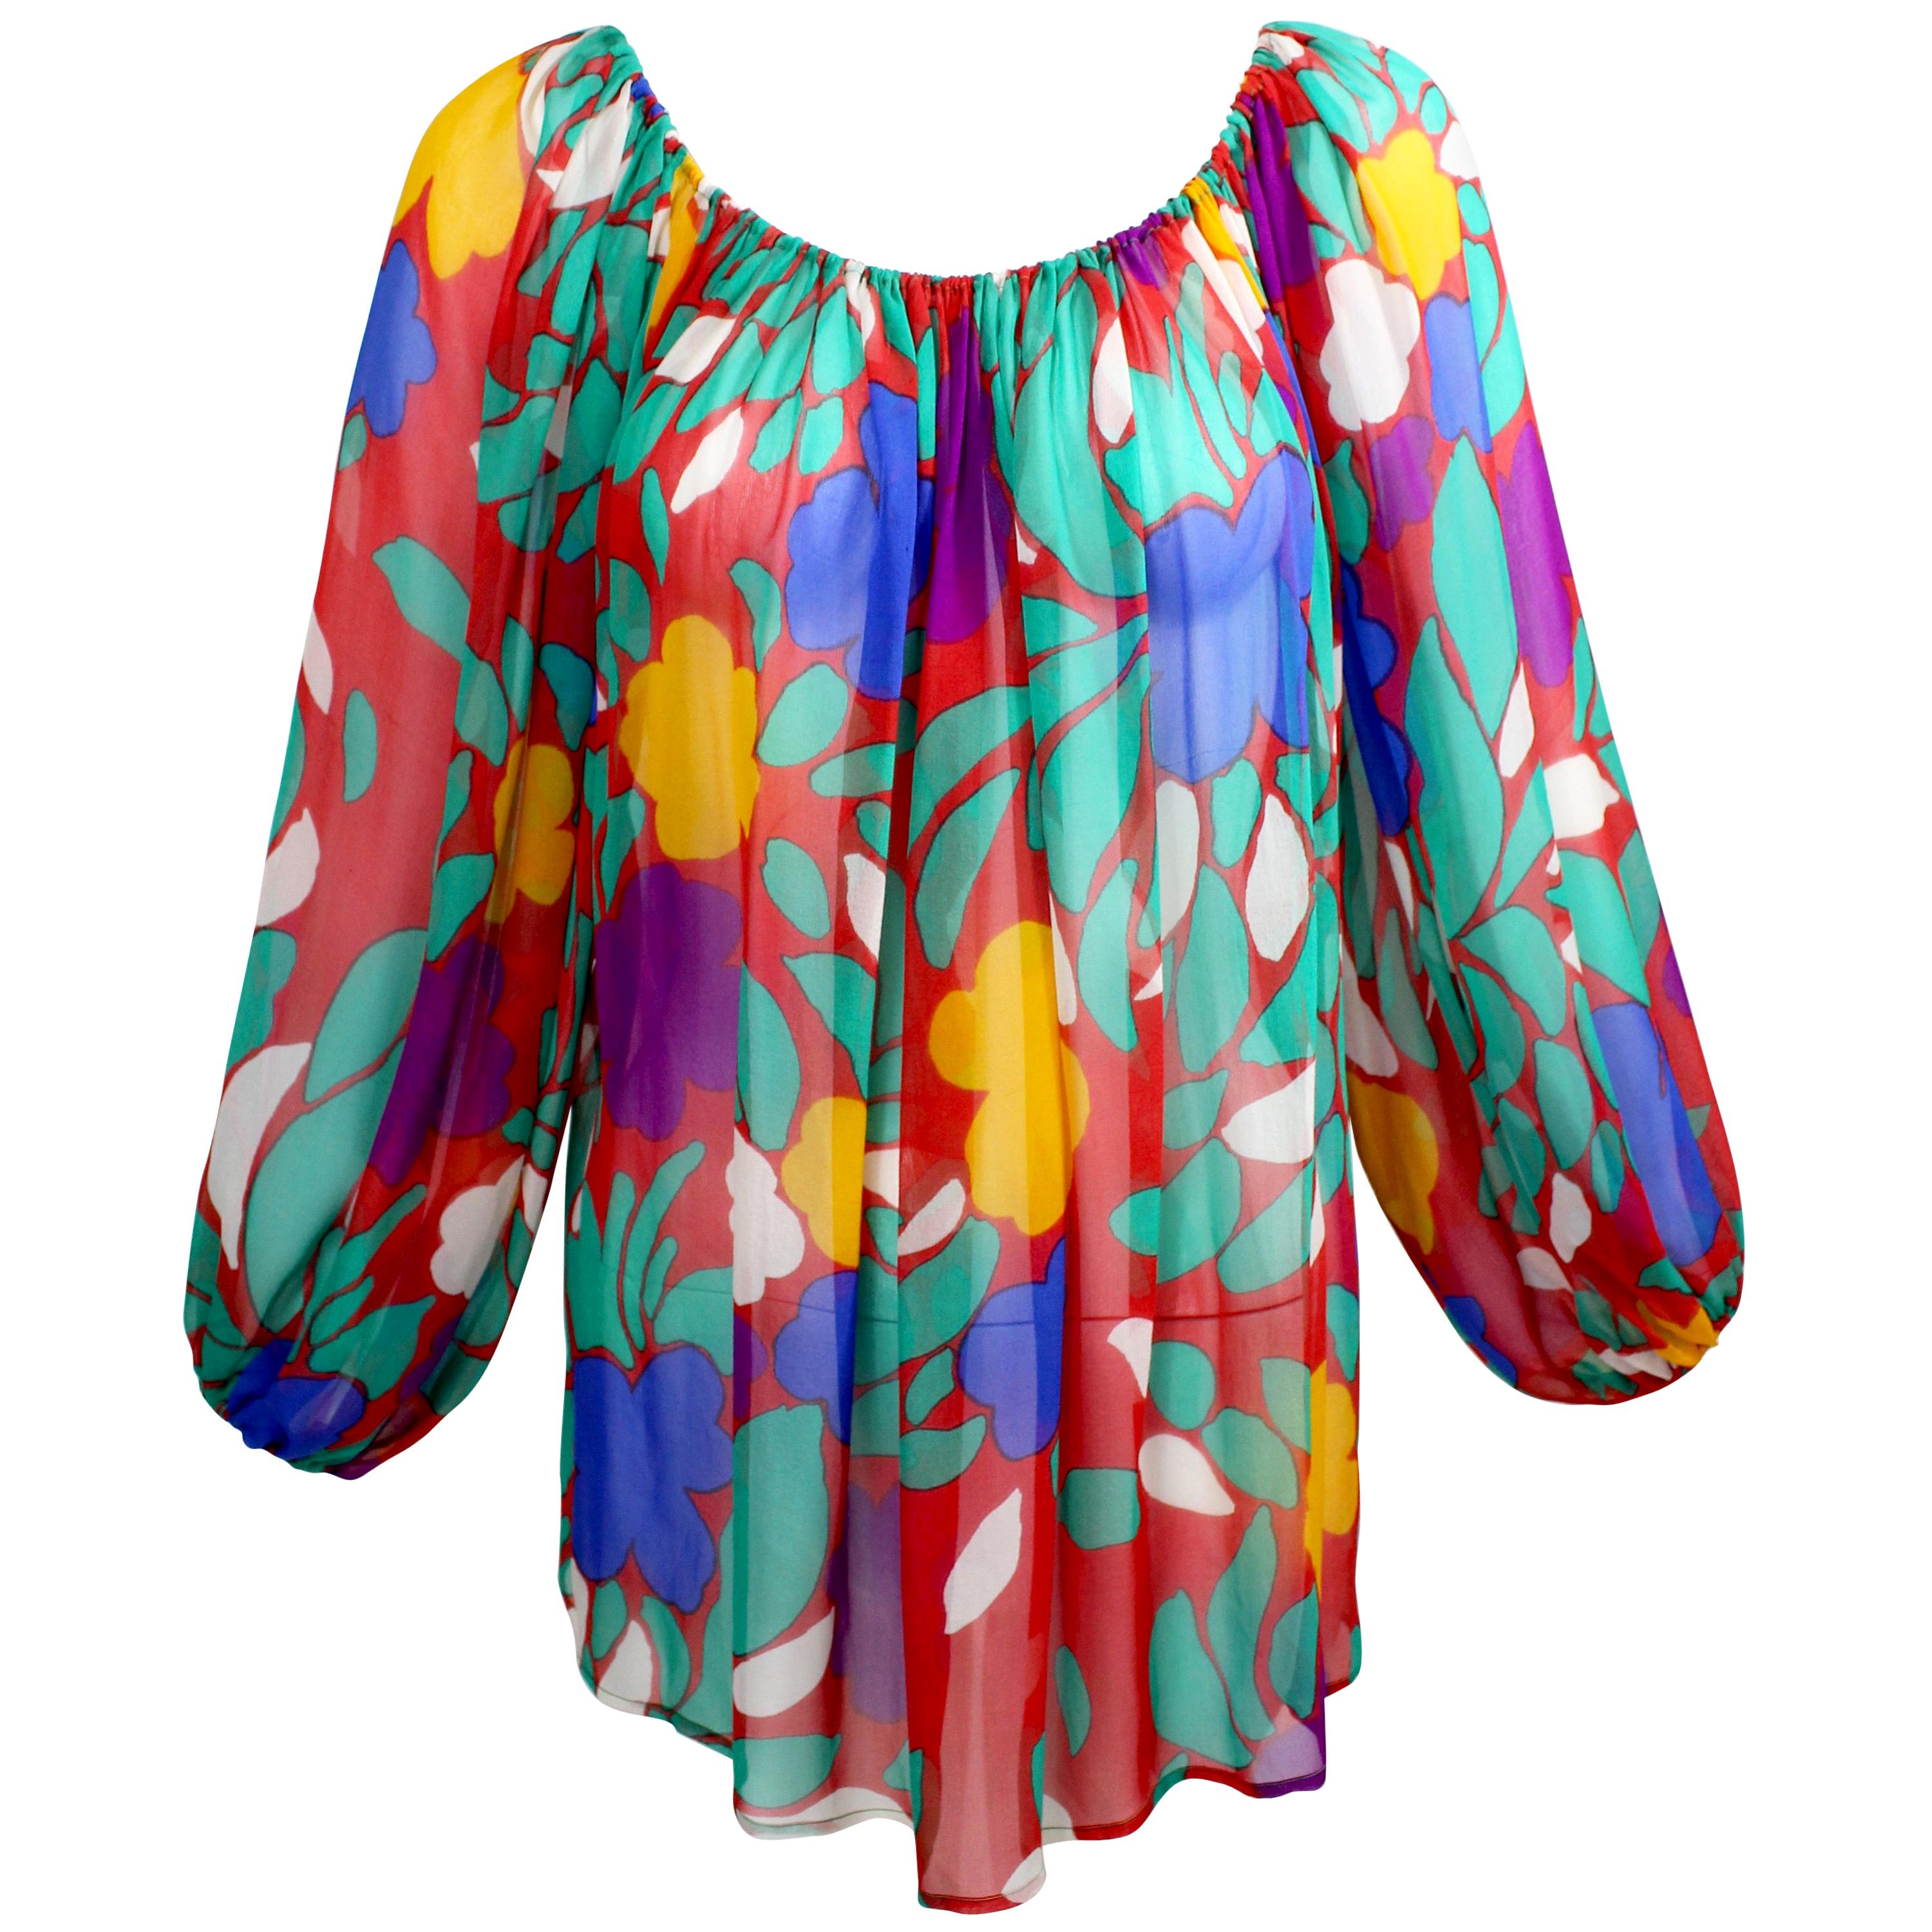 Yves Saint Laurent Silk Chiffon Colorful Floral Print Blouse Documented YSL 1979 For Sale